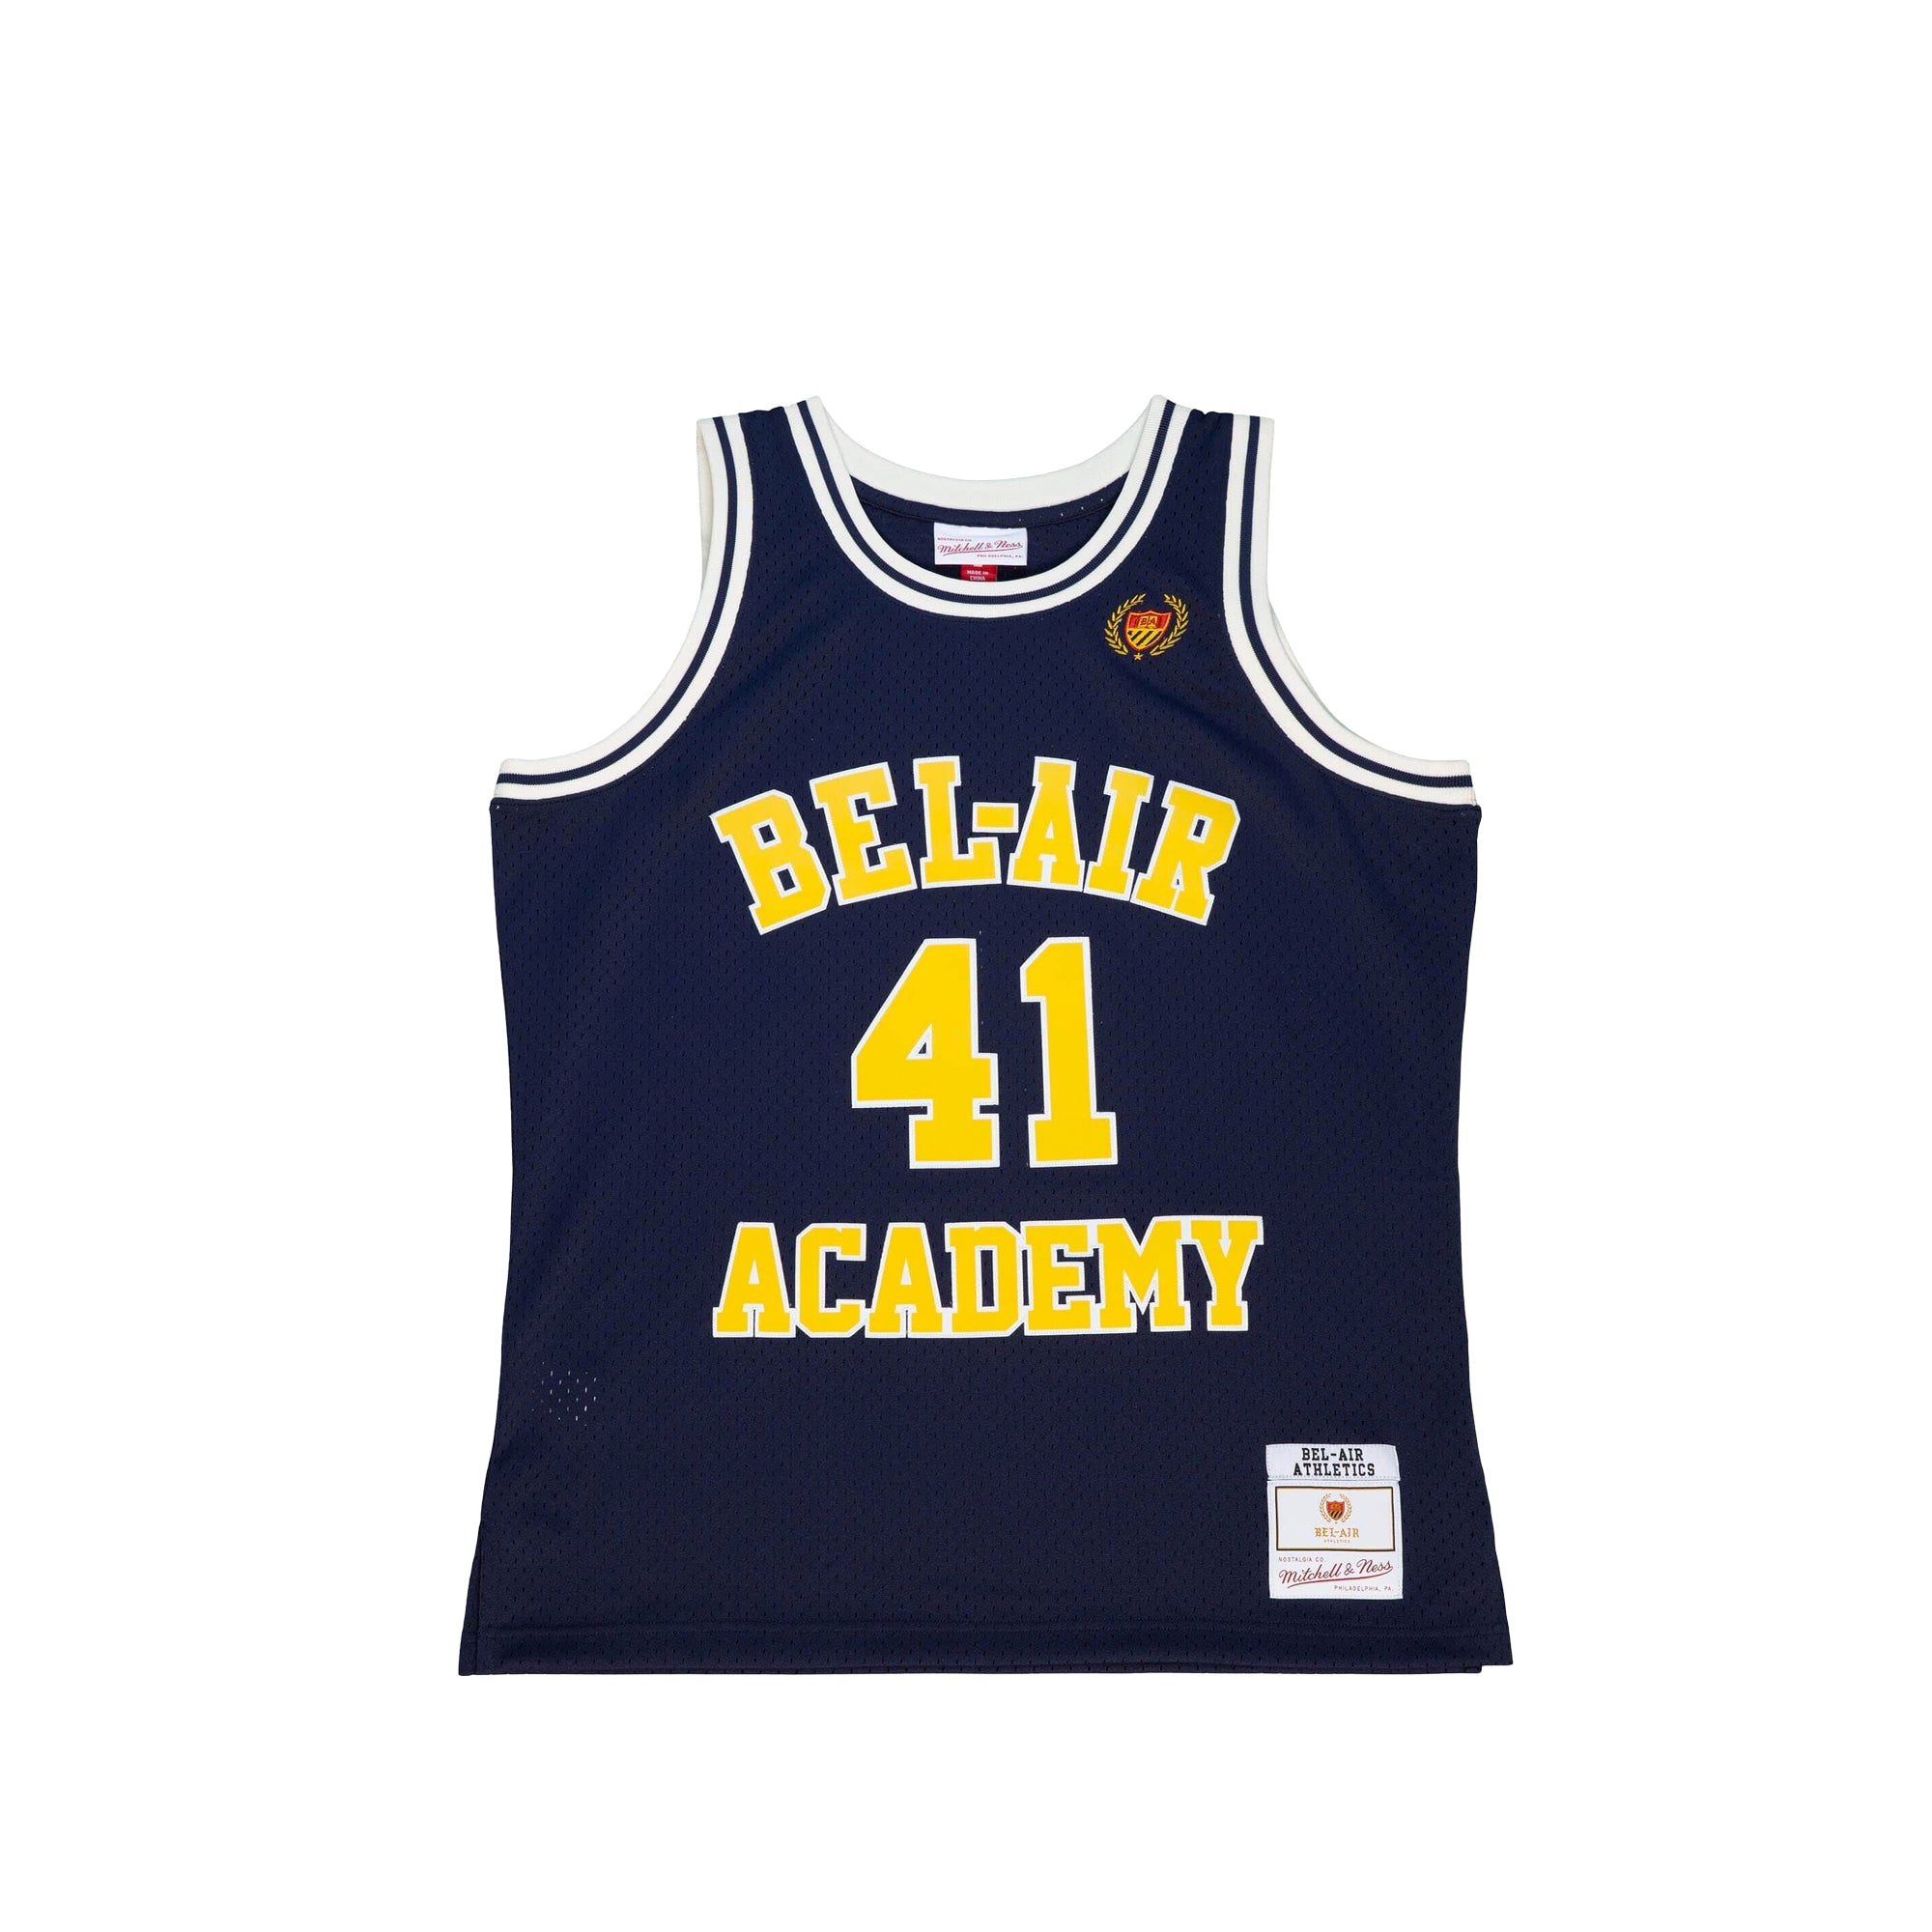 Mitchell & Ness x Bel-Air Academy Men's Basketball Road Jersey in Blue